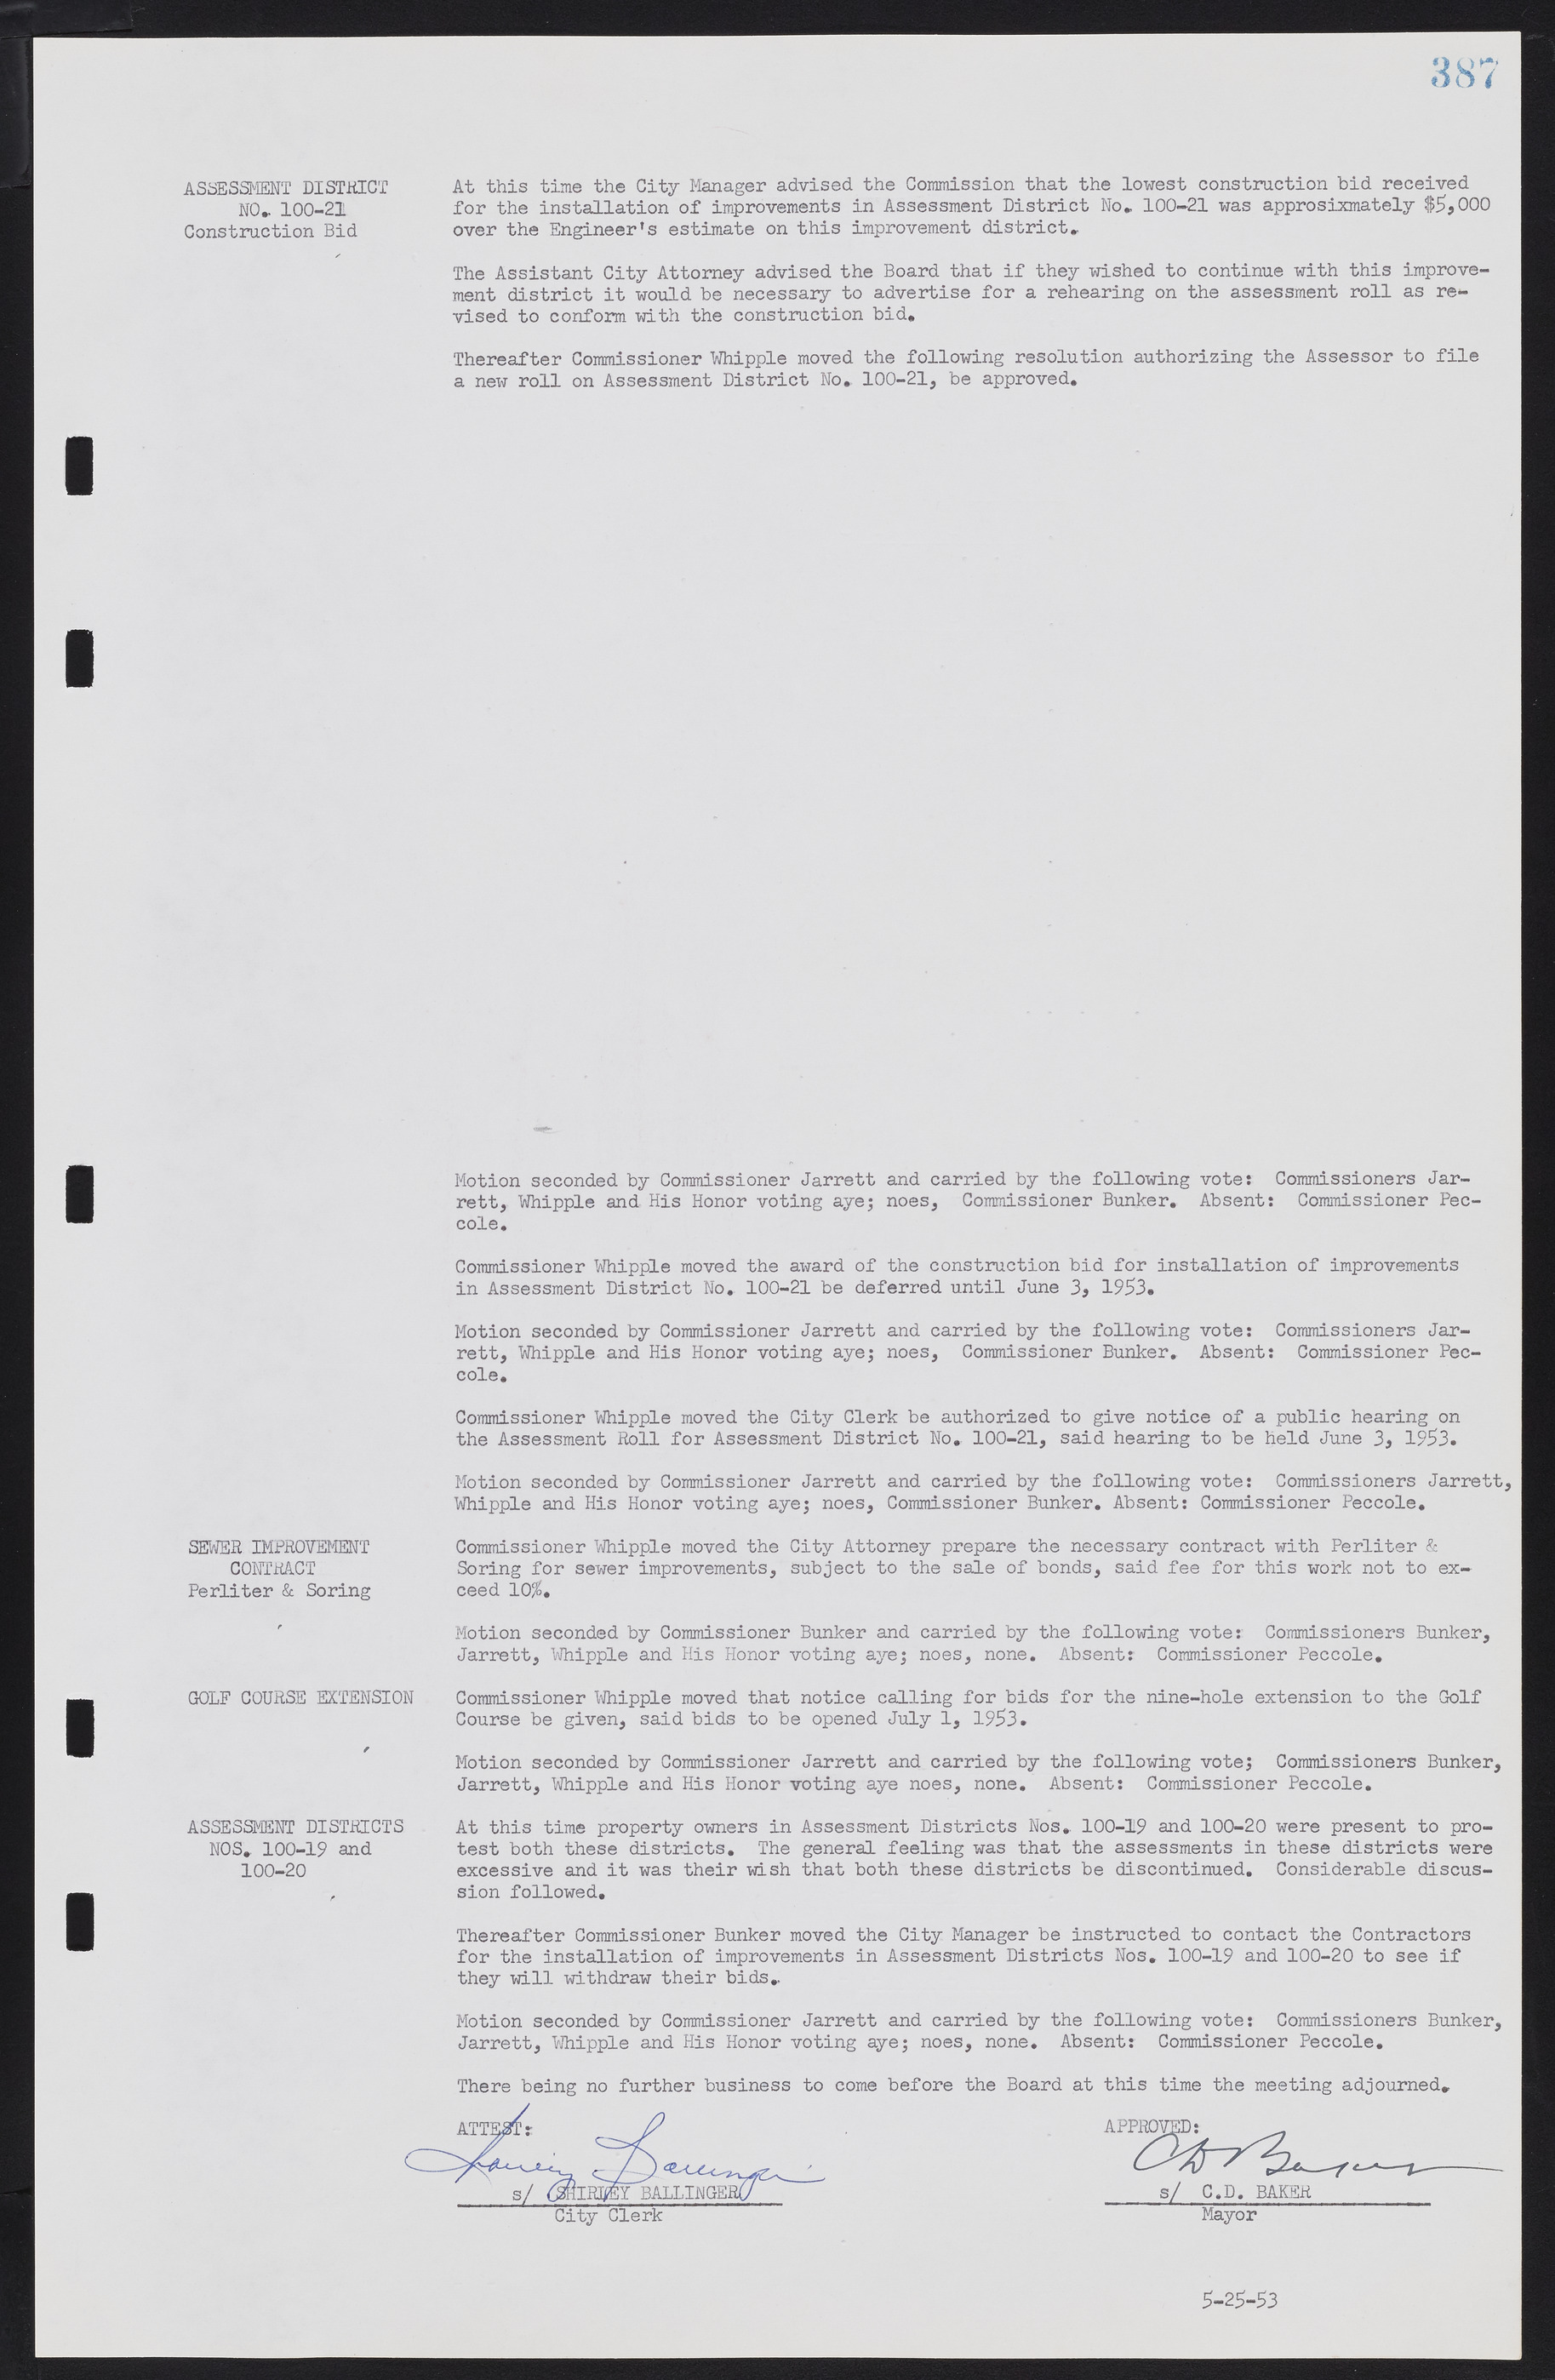 Las Vegas City Commission Minutes, May 26, 1952 to February 17, 1954, lvc000008-415